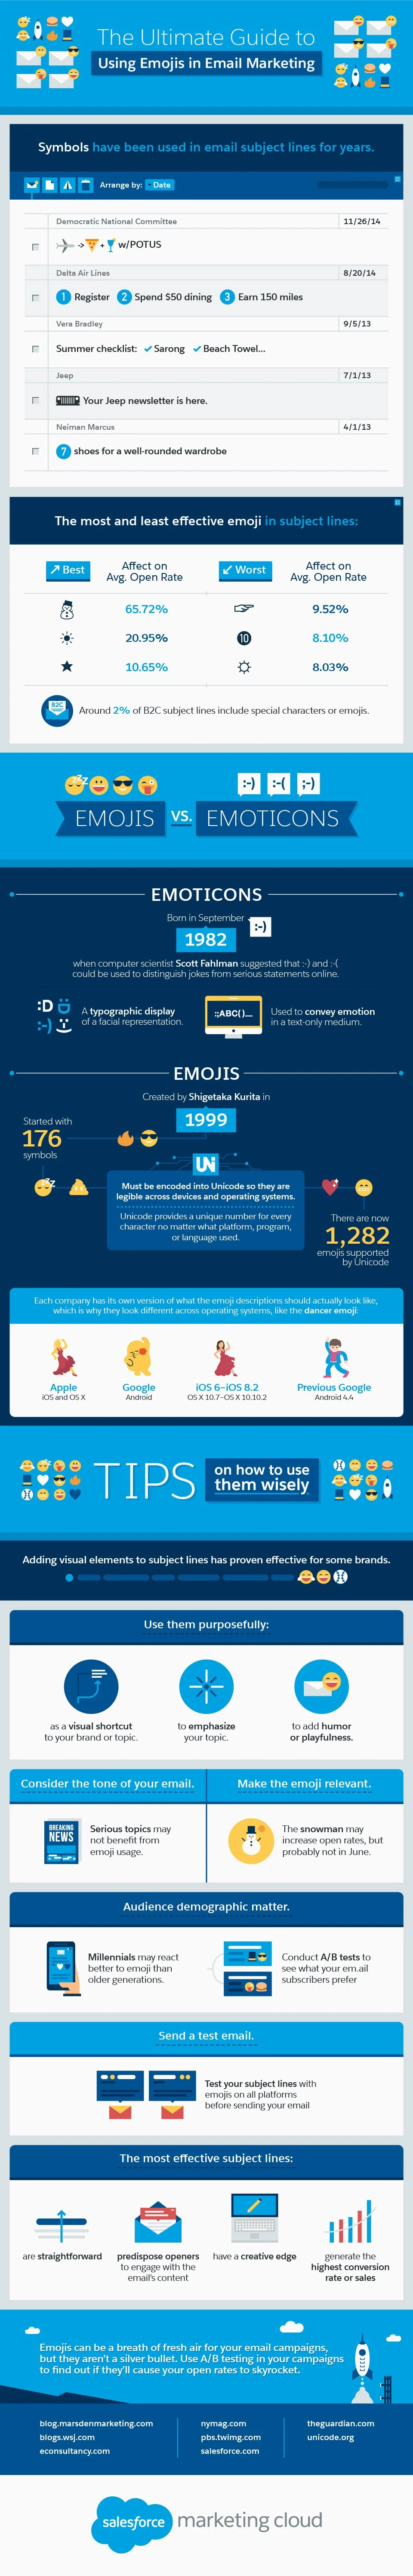 The Ultimate Guide to Using Emojis in Email Marketing - #infographic